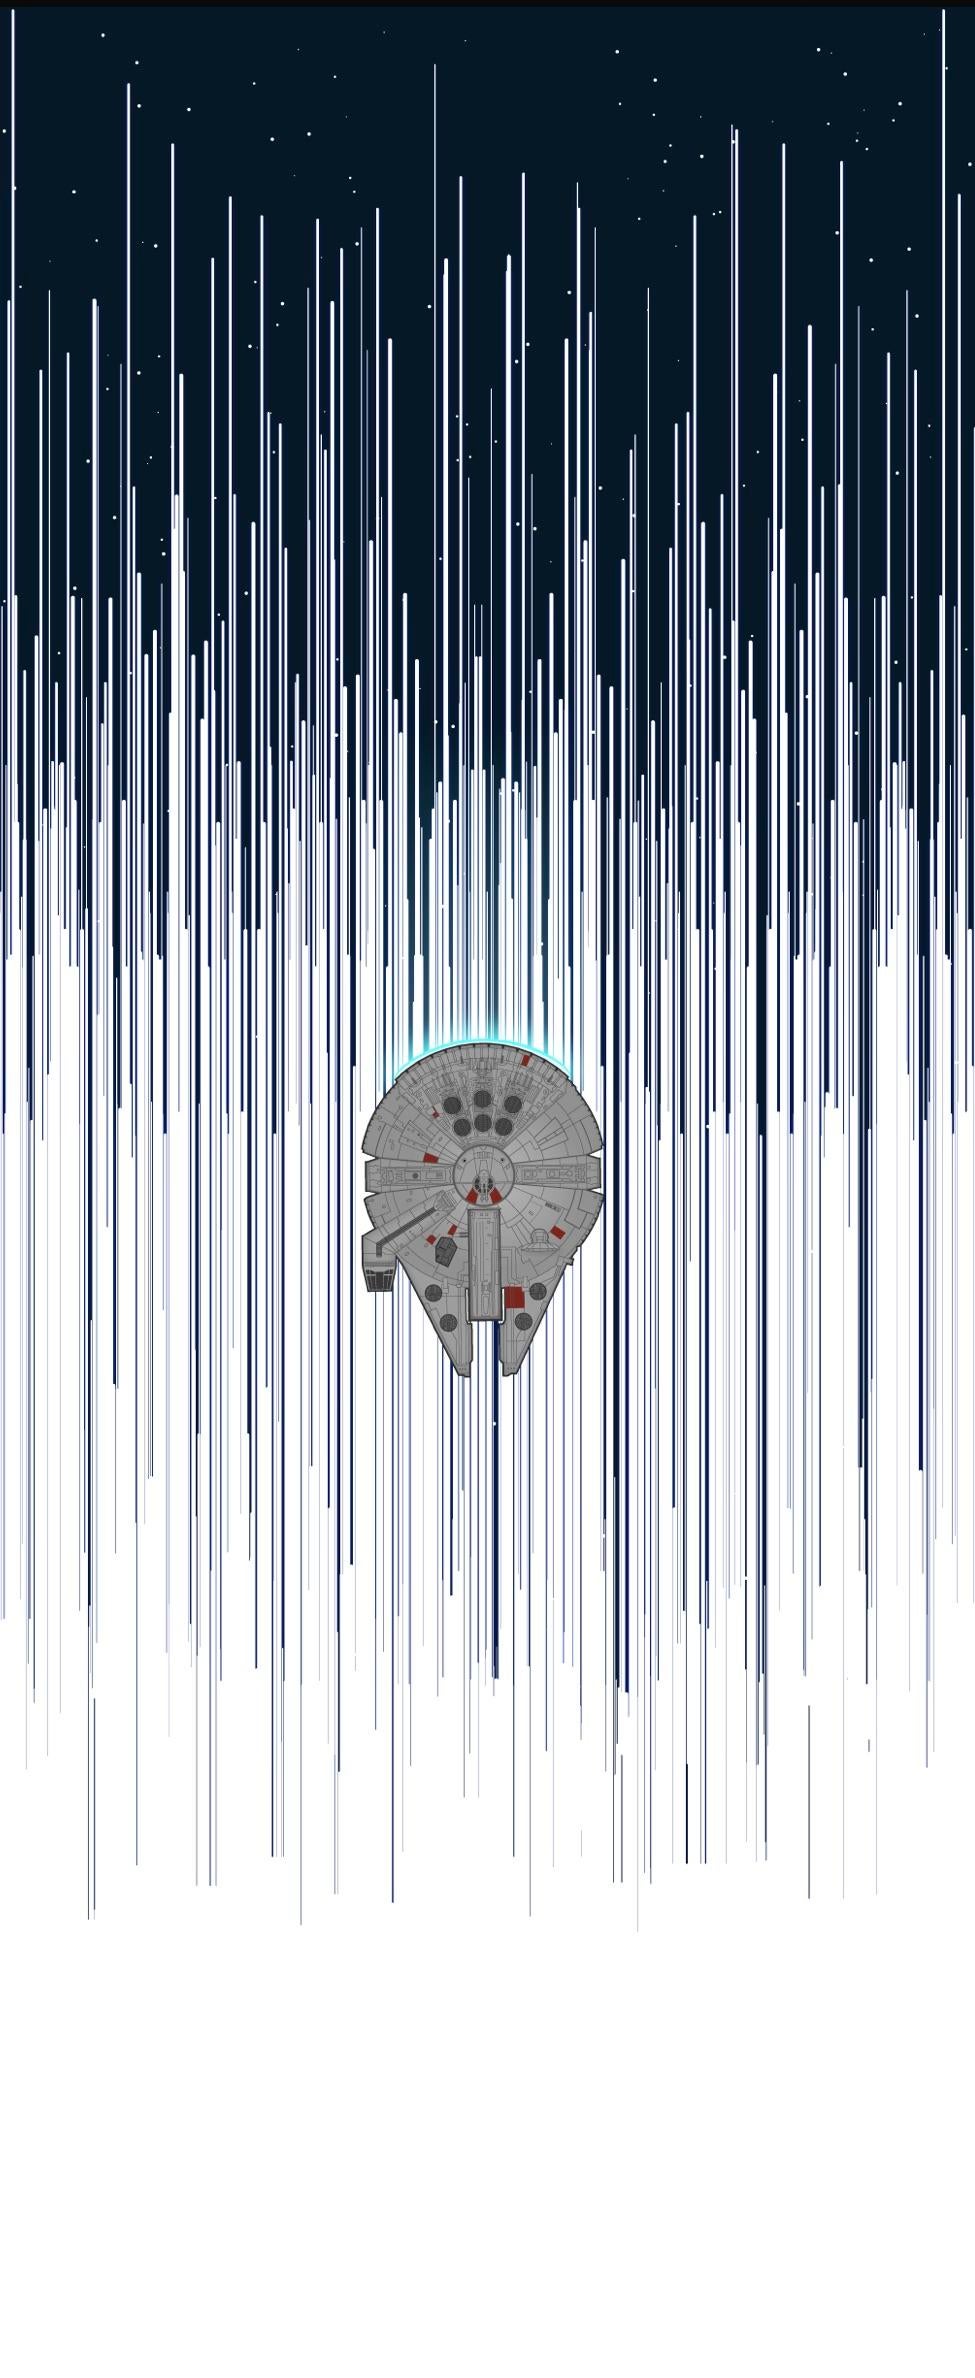 Millennium Falcon wallpaper set to perspective on my lock screen